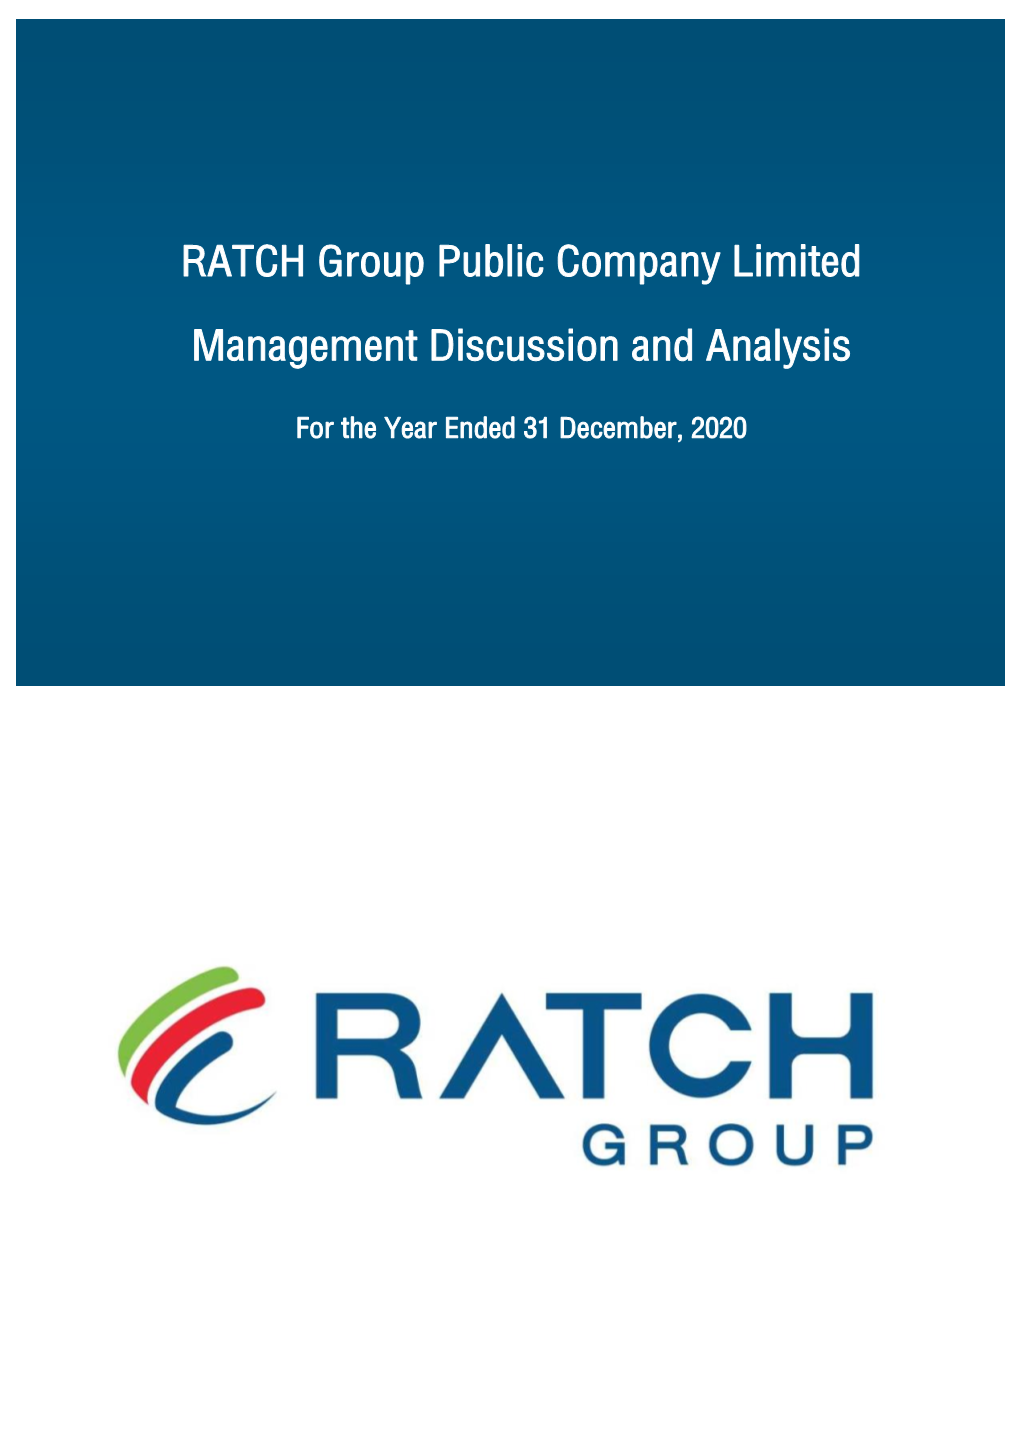 RATCH Group Public Company Limited Management Discussion and Analysis for the Year Ended 31 December, 2020